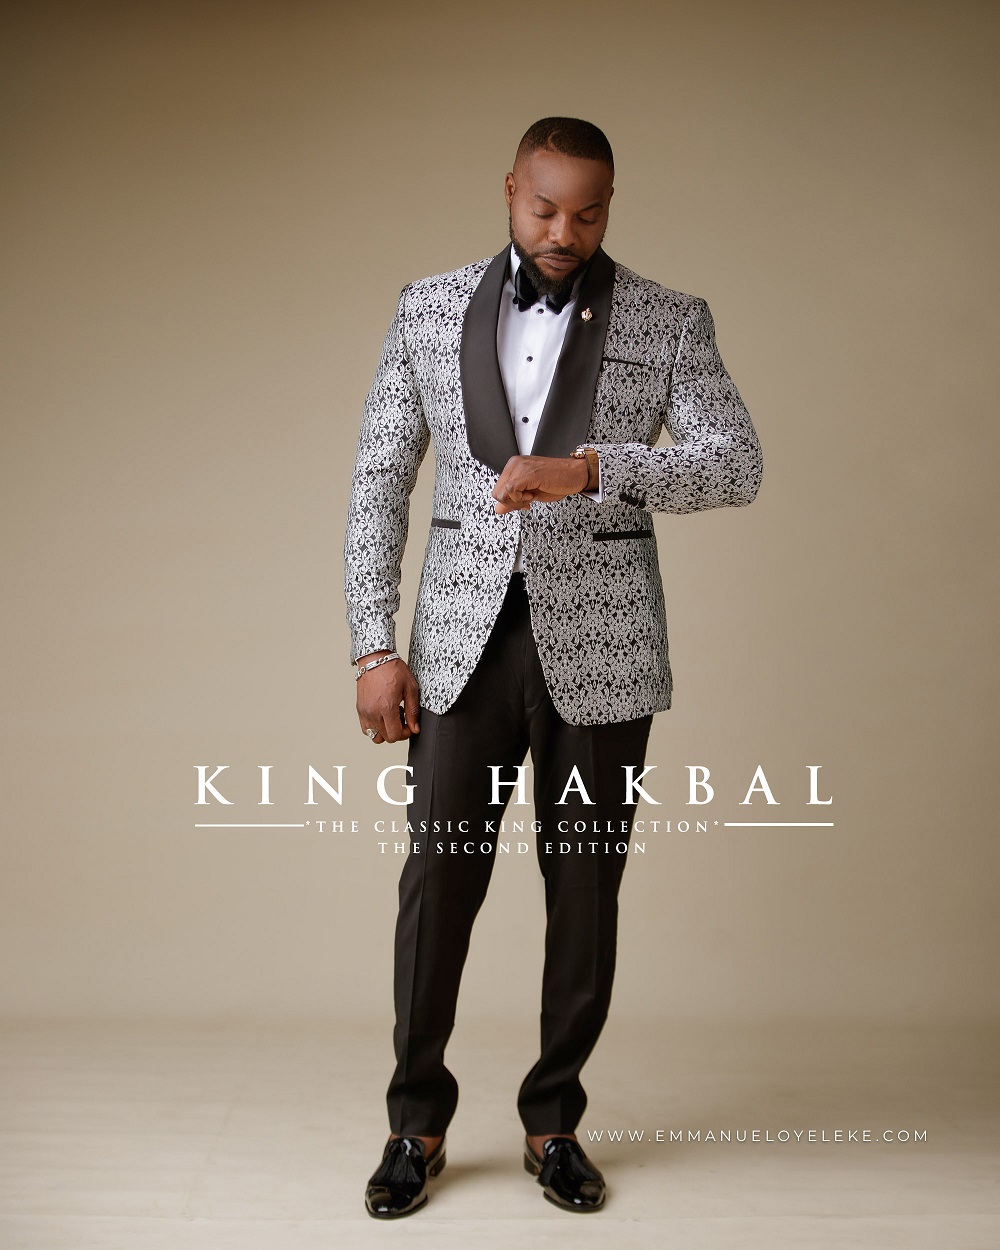 King Hakbal’s “Classic King” Collection Is An Ode To Traditional Style